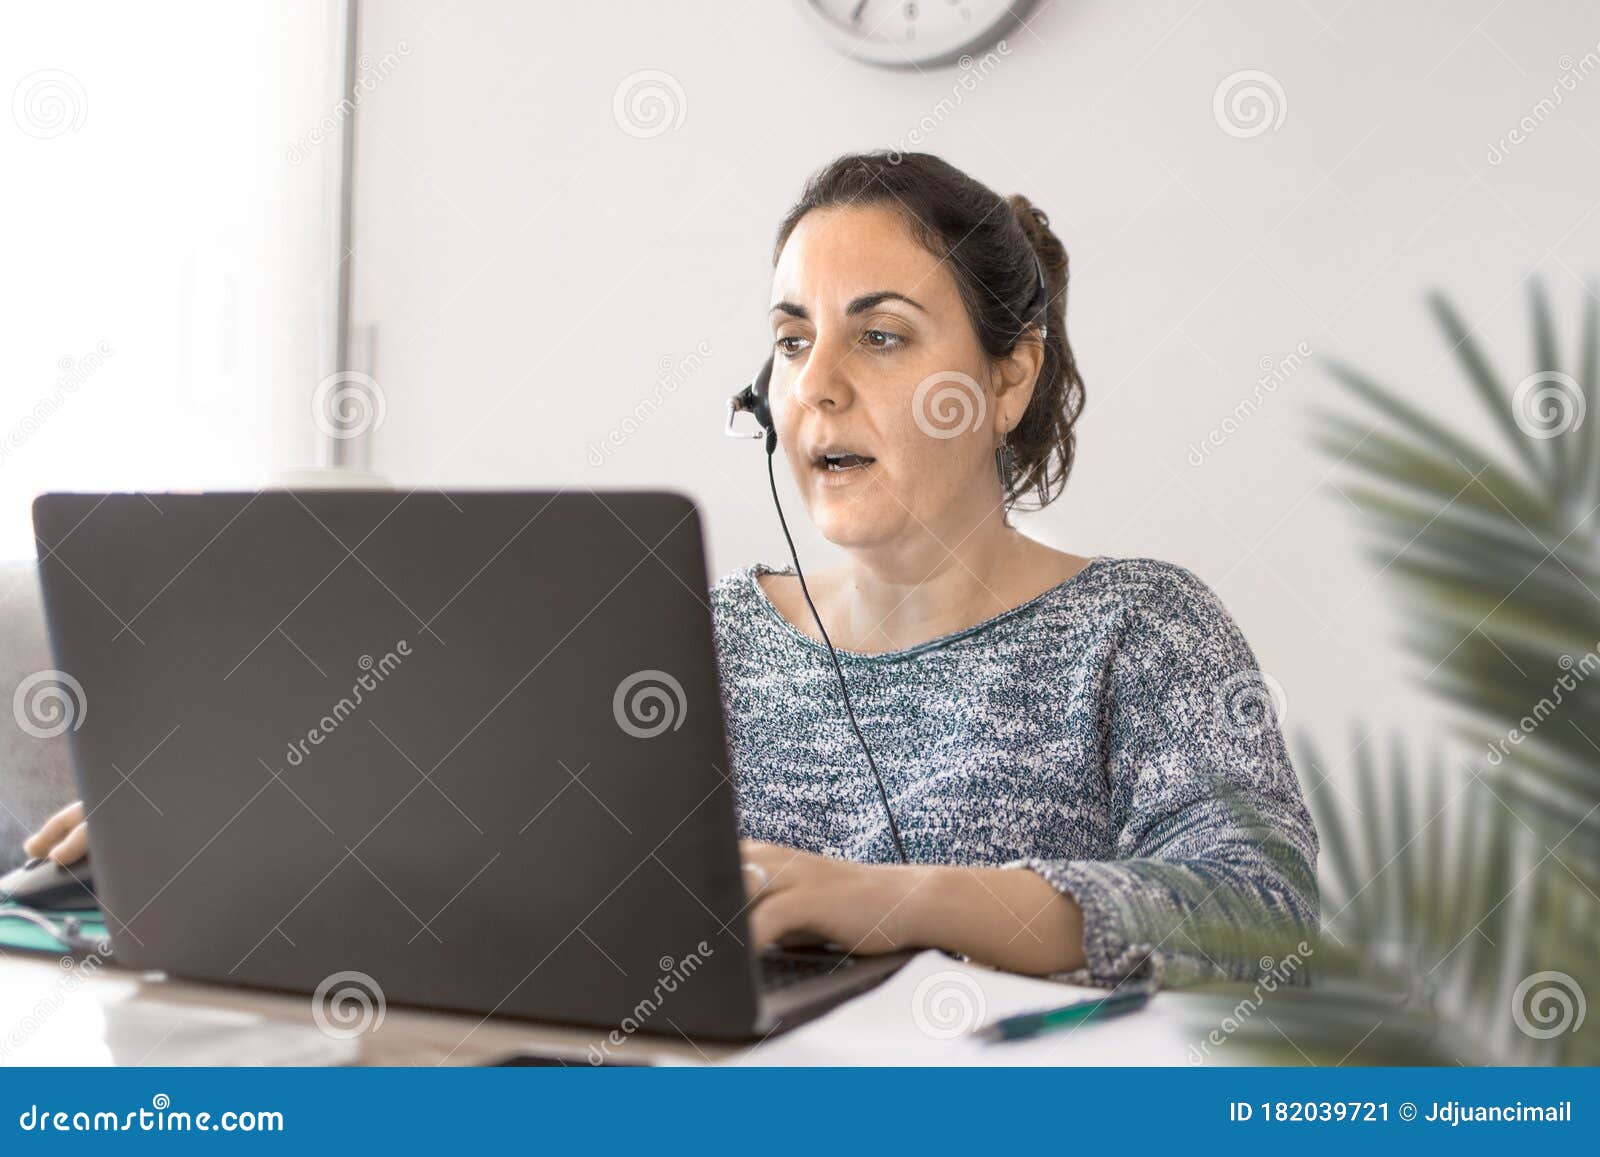 teleworking woman with a headphones and a laptop computer at home in the livingroom. telework concept and empty copy space